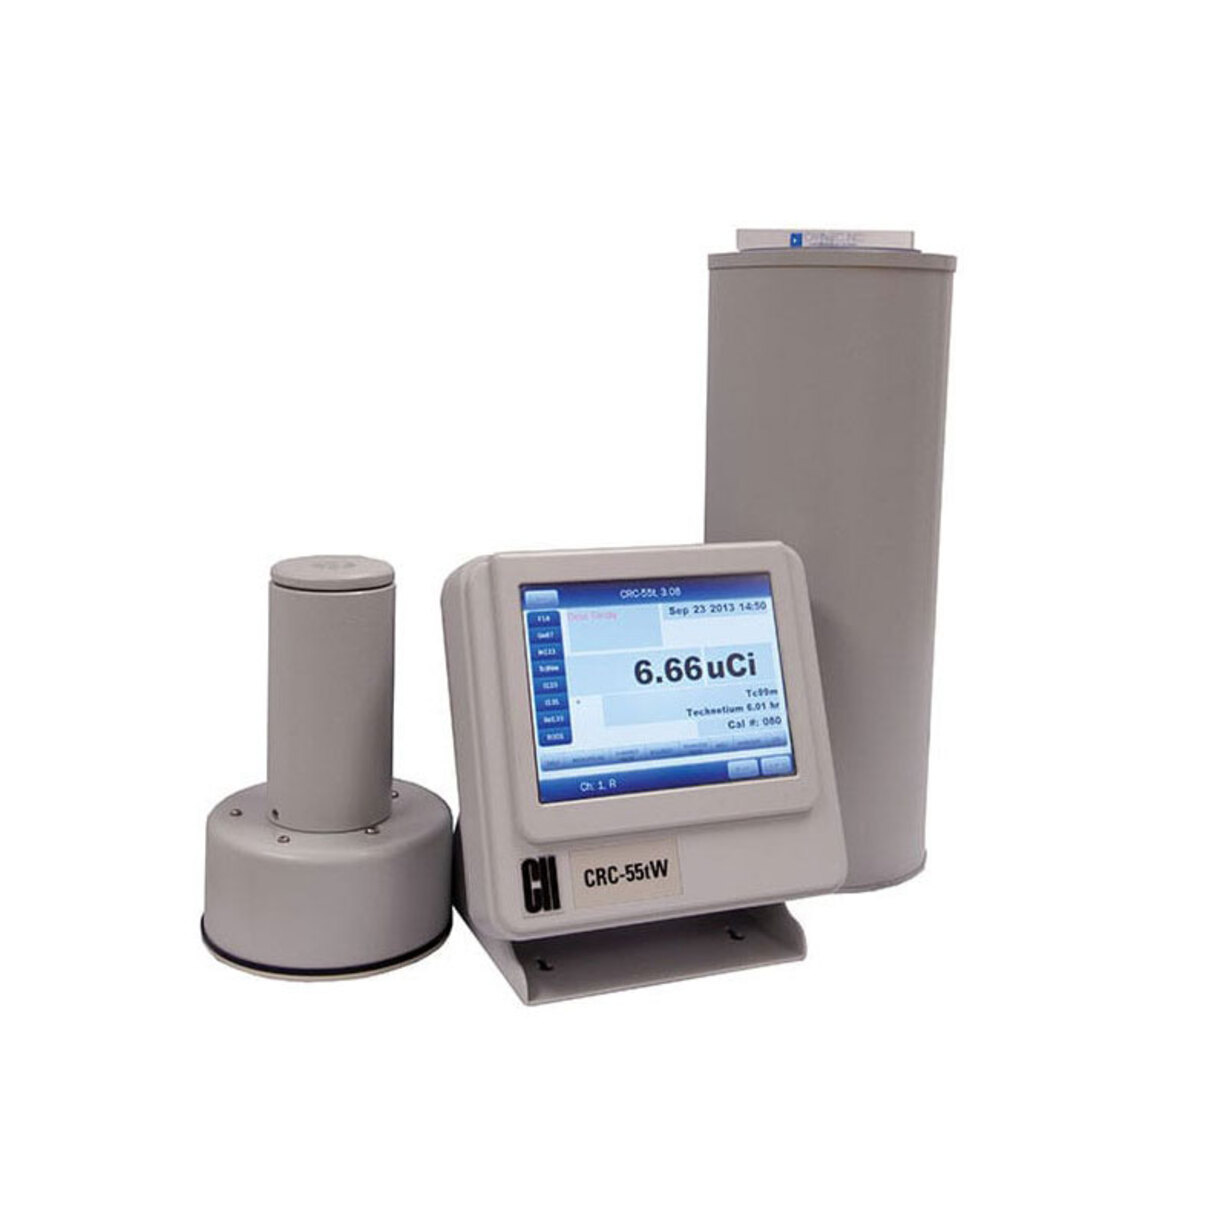 CRC ® 5tW Dose Calibrator/Well Counter